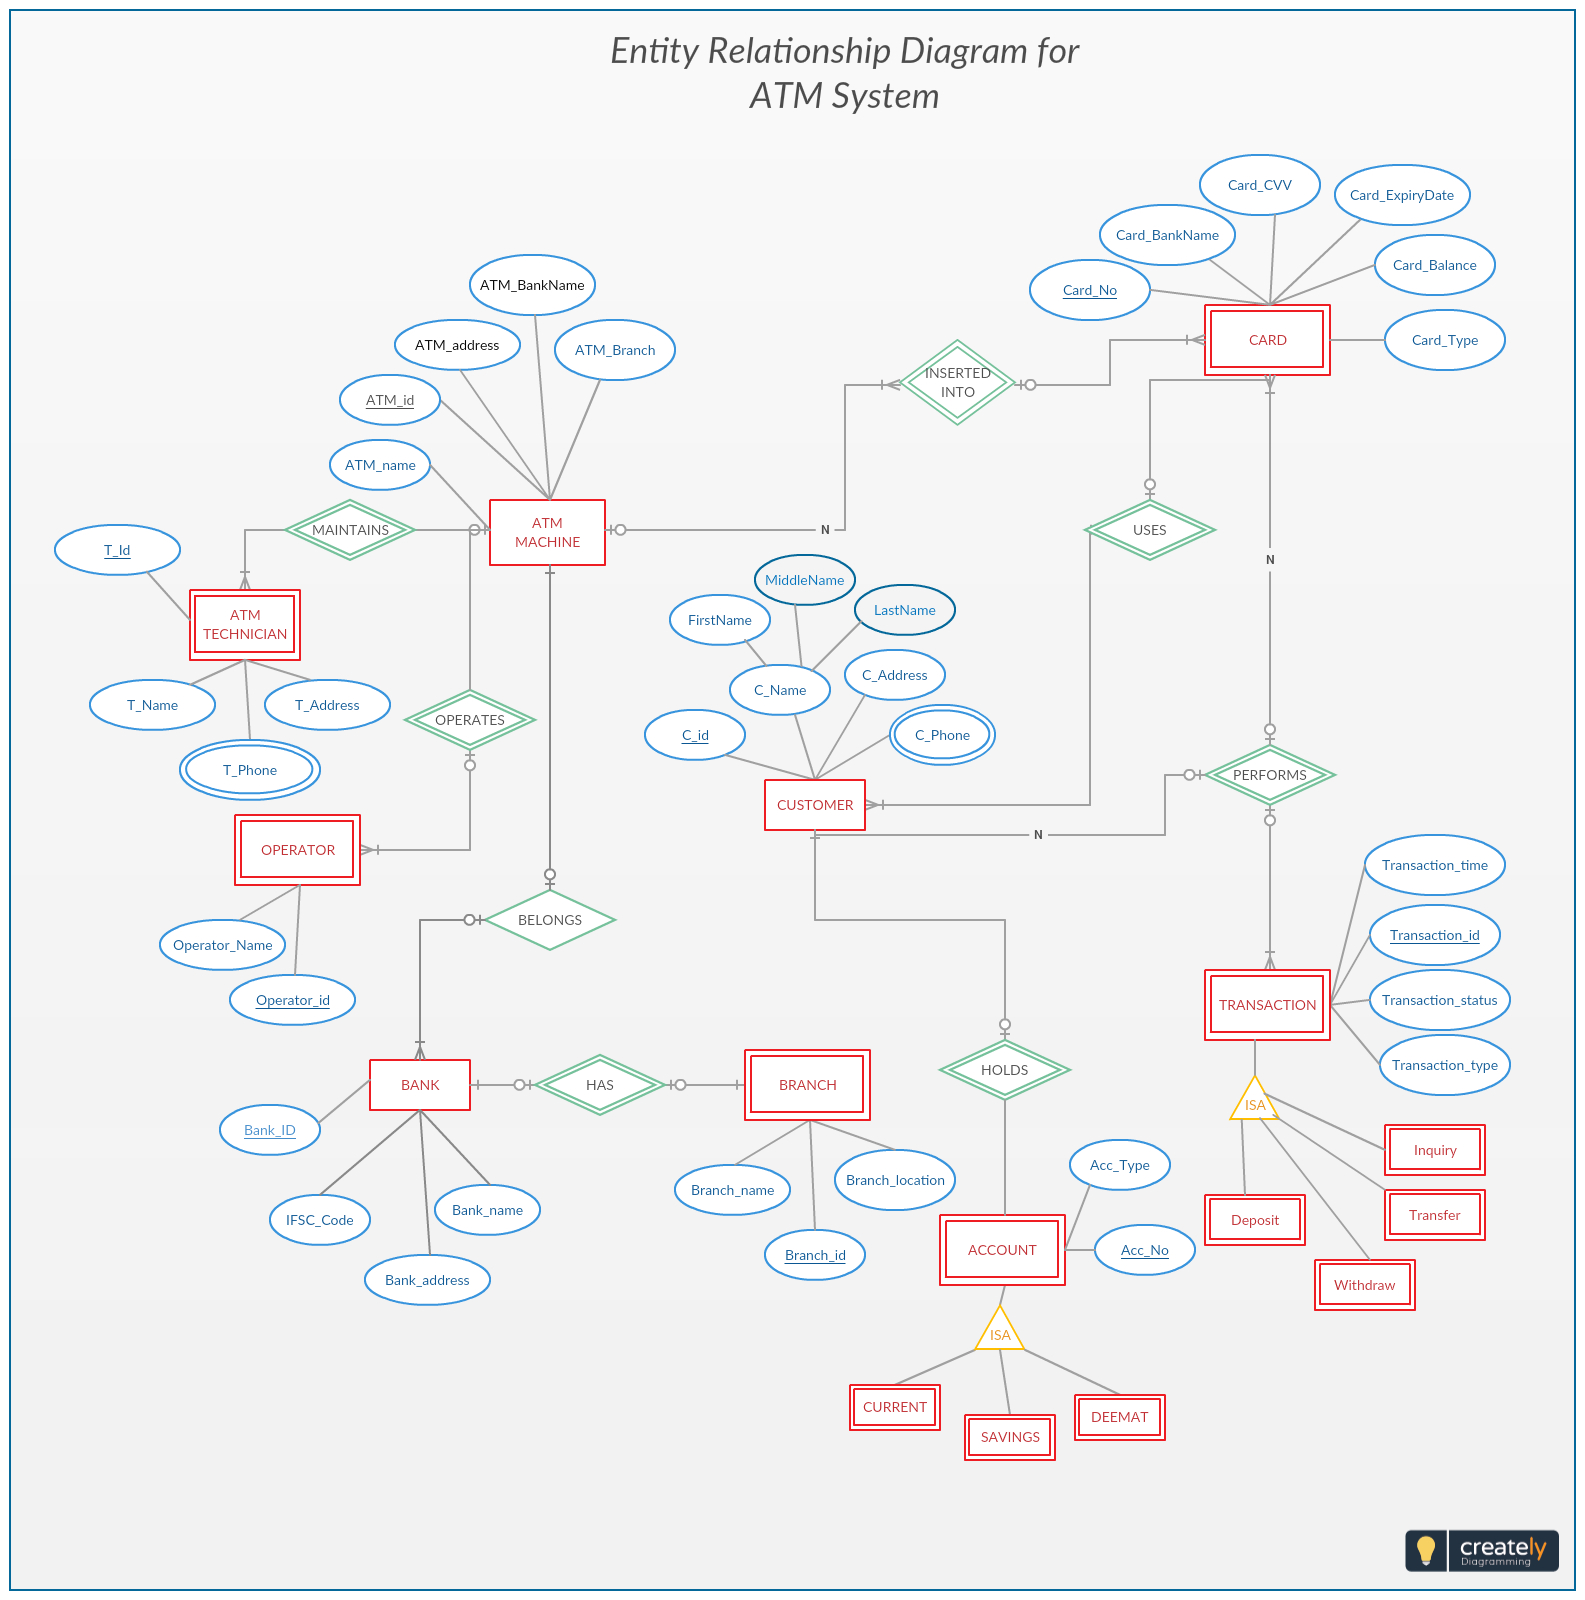 Pin On Entity Relationship Diagram Templates throughout Entity Relationship Diagram Explained